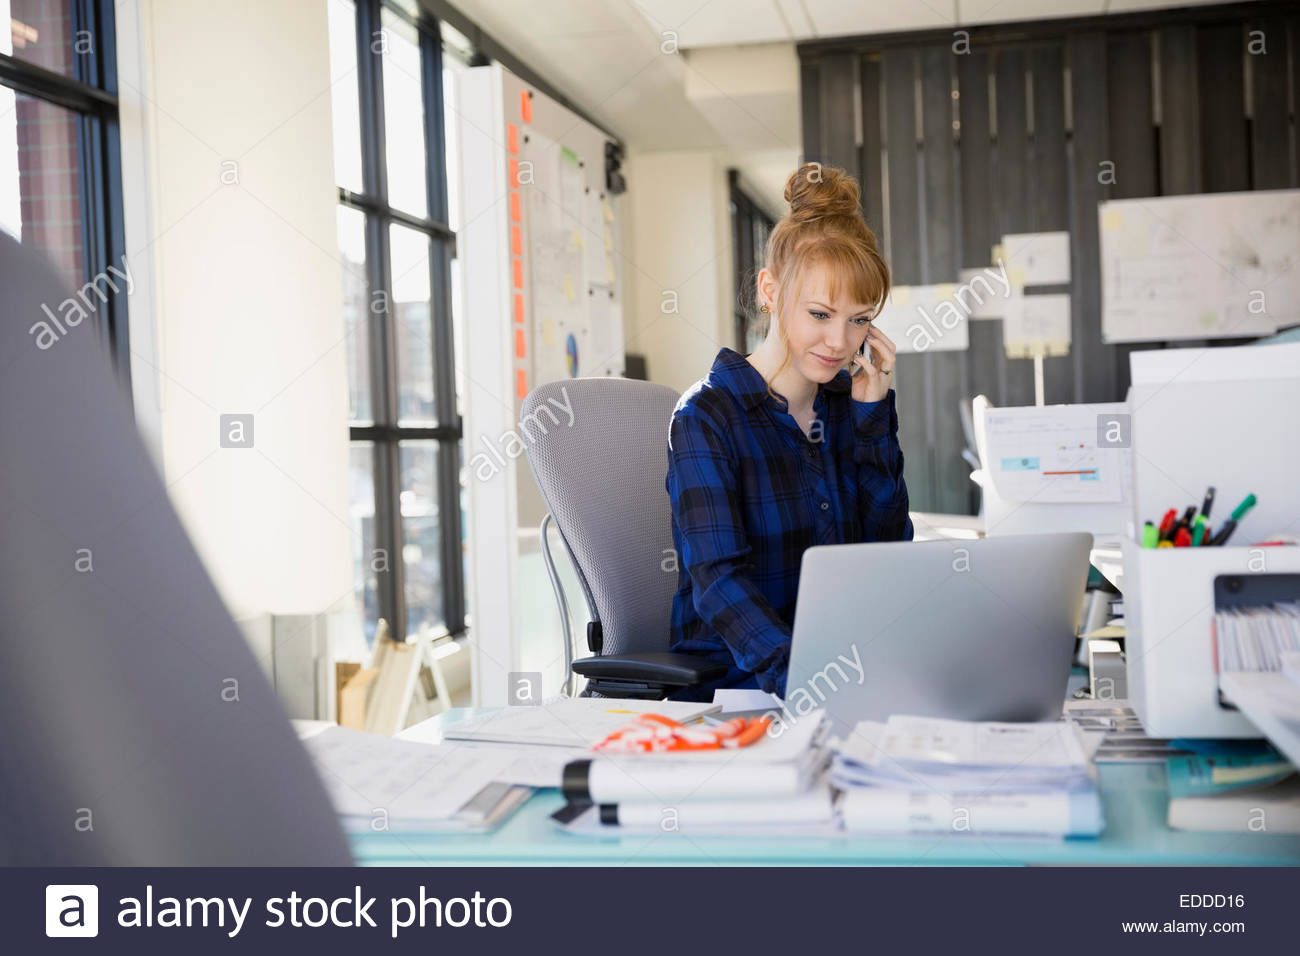 Businesswoman working at desk in office Banque D'Images